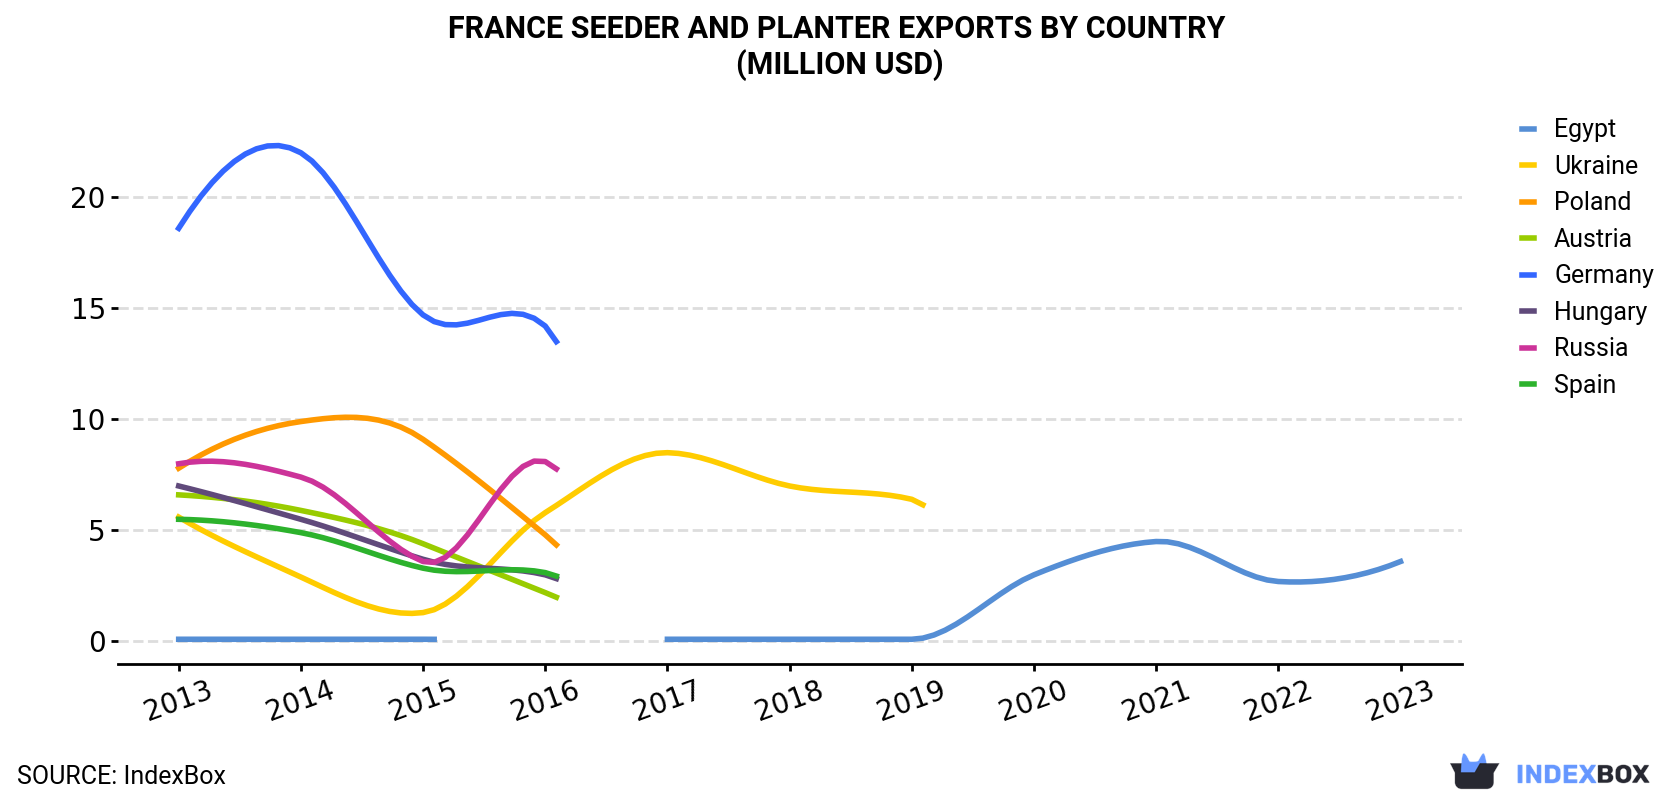 France Seeder And Planter Exports By Country (Million USD)